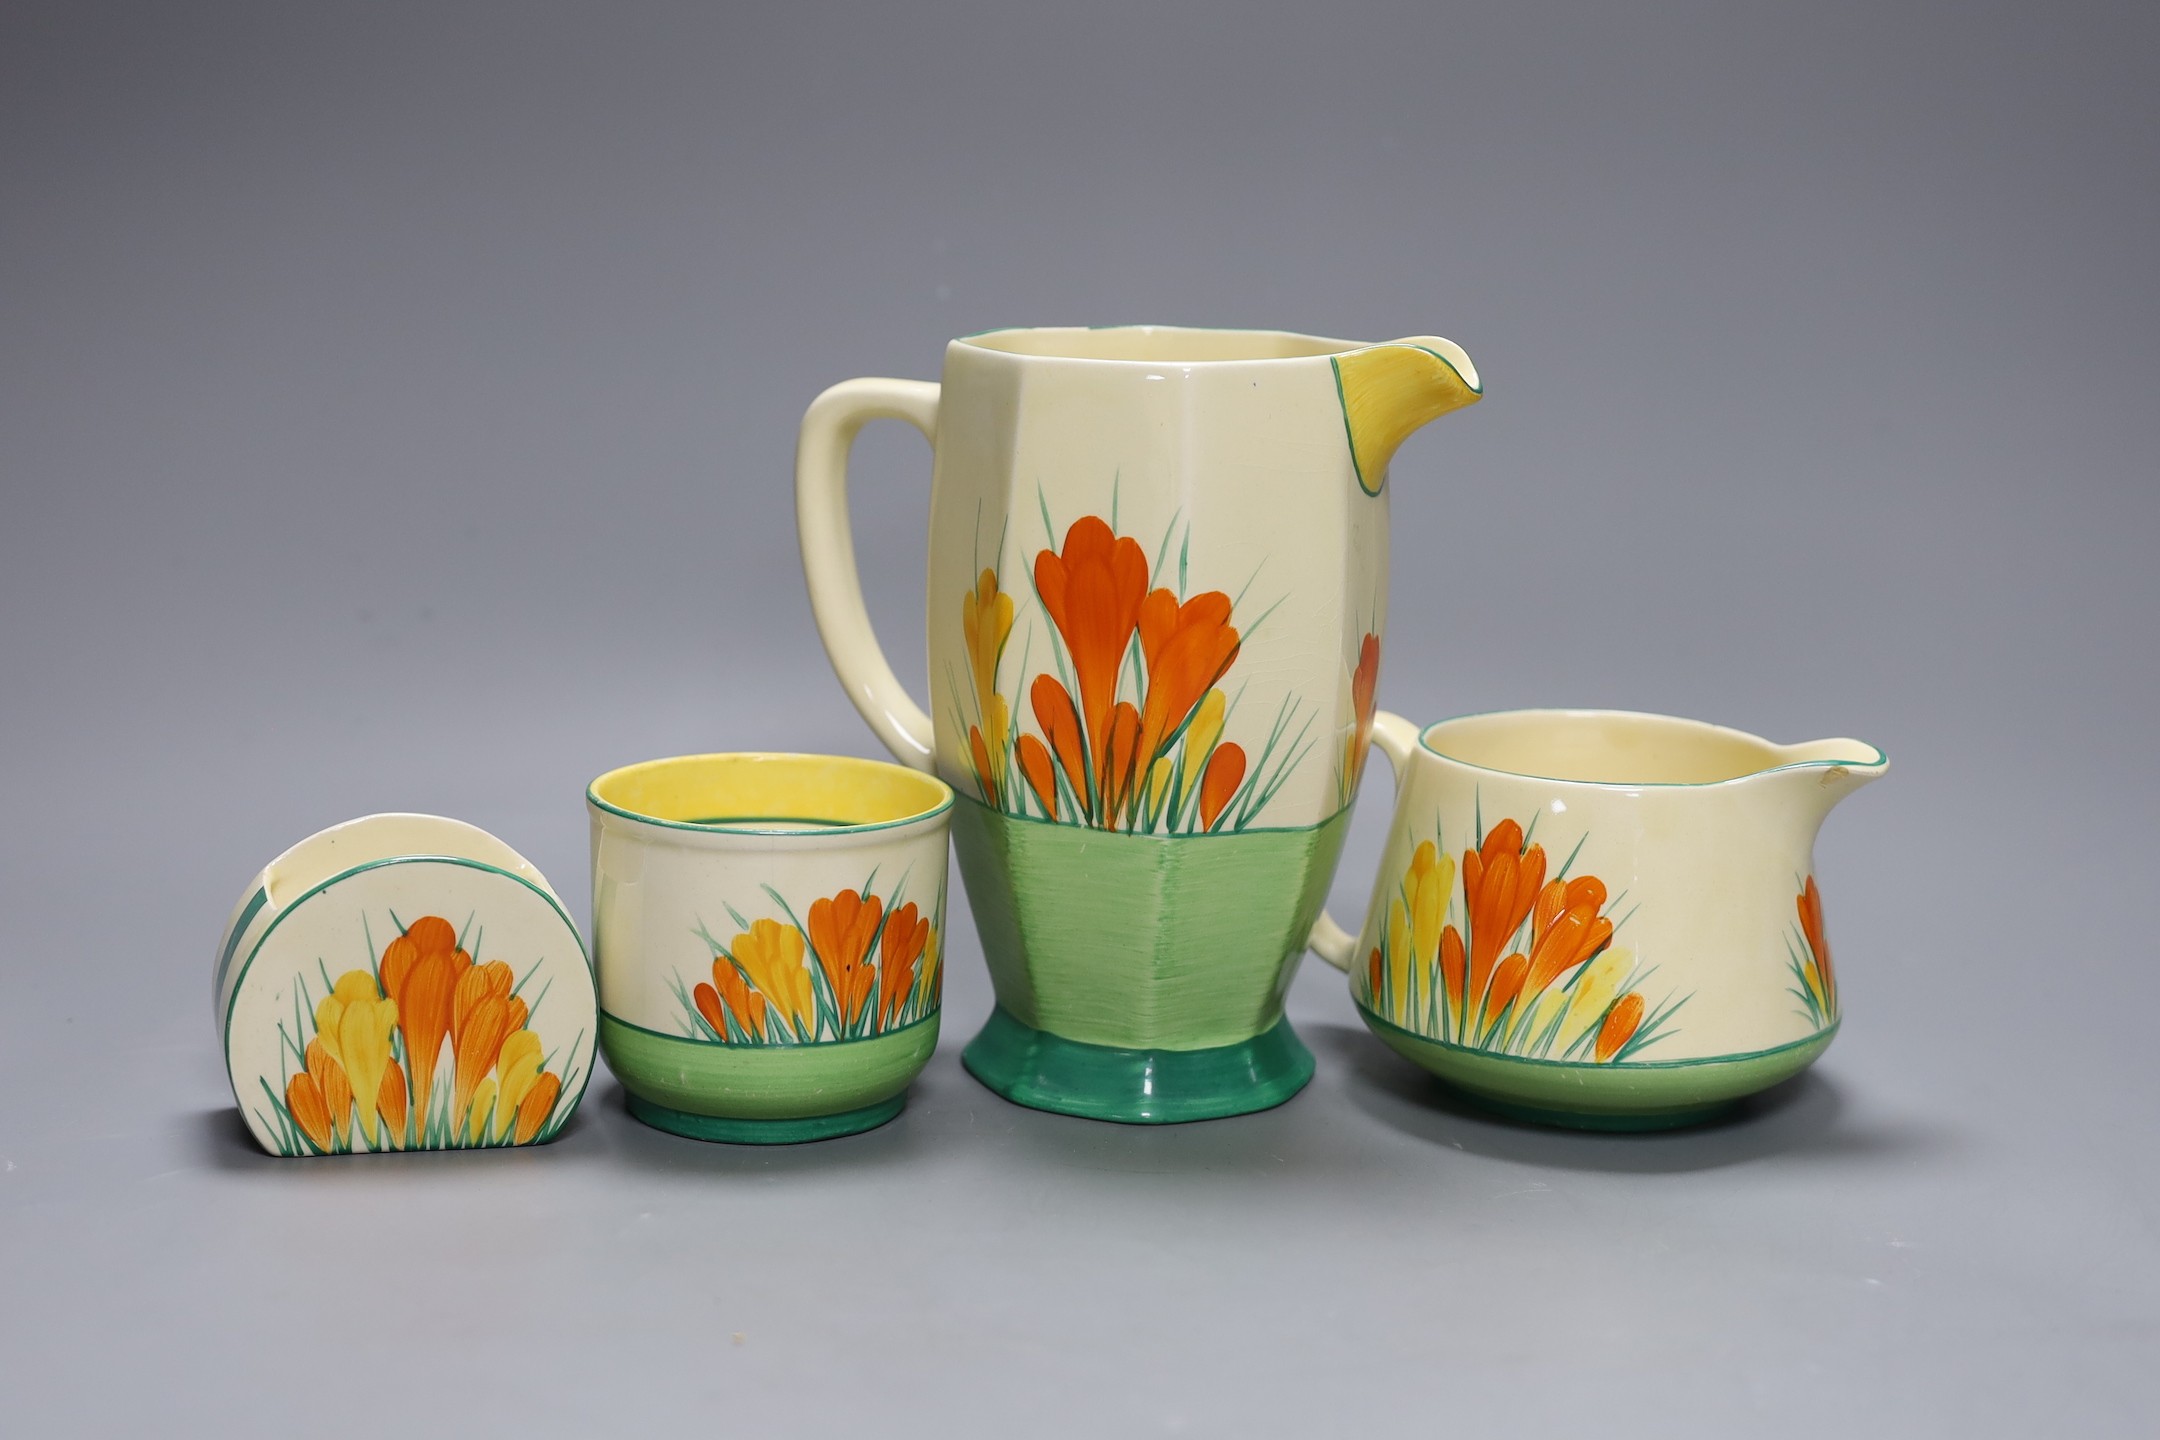 Two Clarice cliff “Sungleam”, crocus jugs and two pots, (4), tallest jug 17 cms high